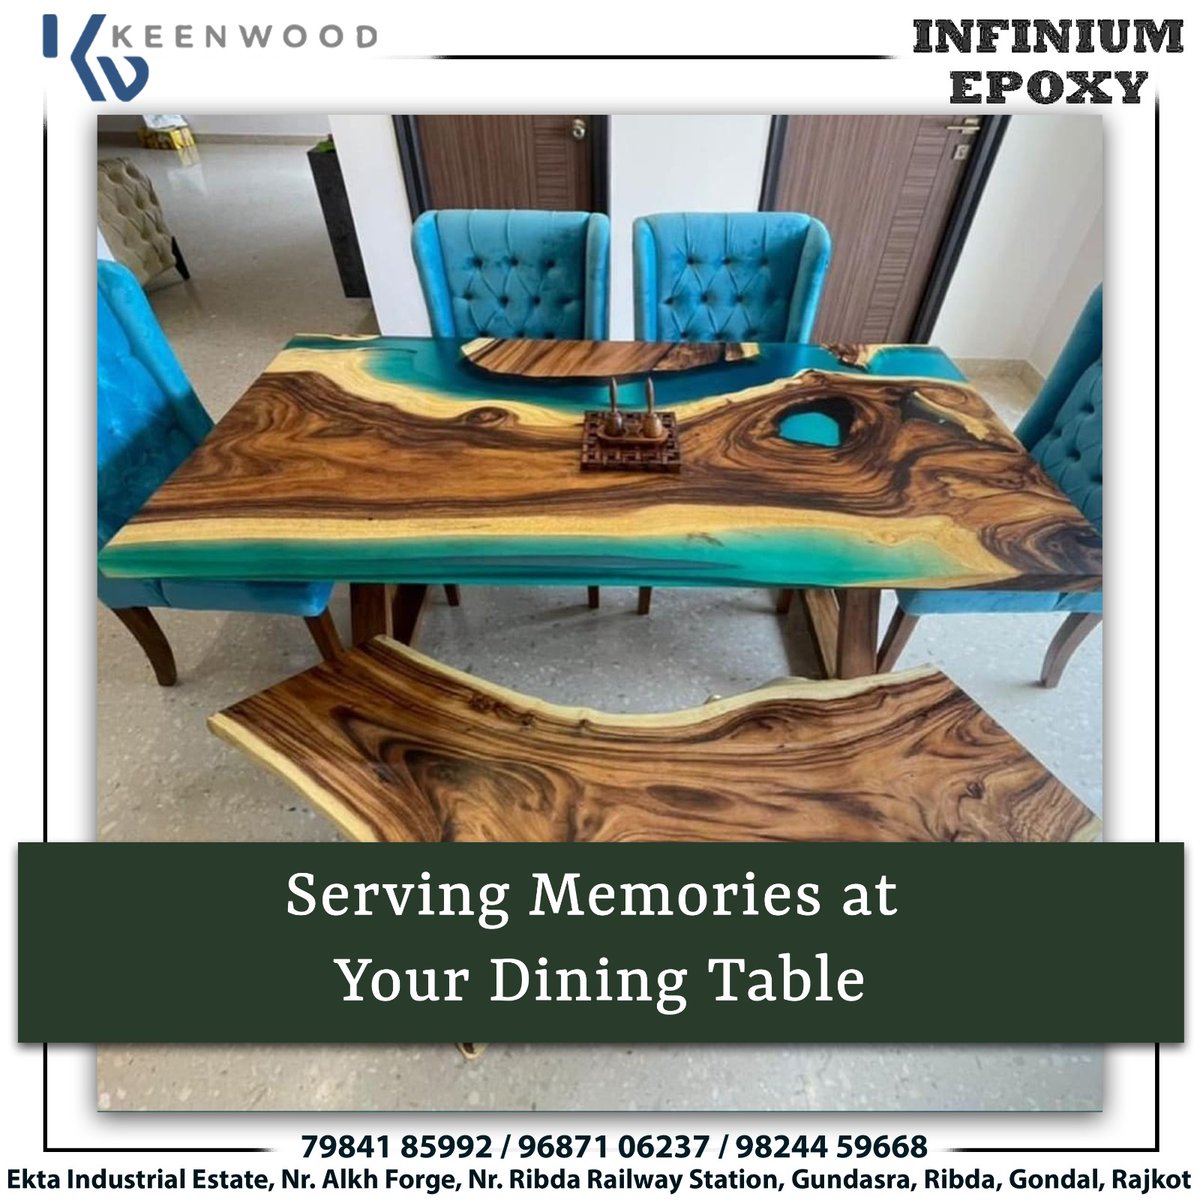 Get your Dining table with Attractive design to look more beautiful.
Order Now:- 079841 85992 / 96871 06237
.
.
.
#infiniumepoxy #infinium #furniture #resinartdesign #resinartsupplies #wallclockdesign #wallclockvintage #resinwallclock #diningtabledesign #diningtablestyling